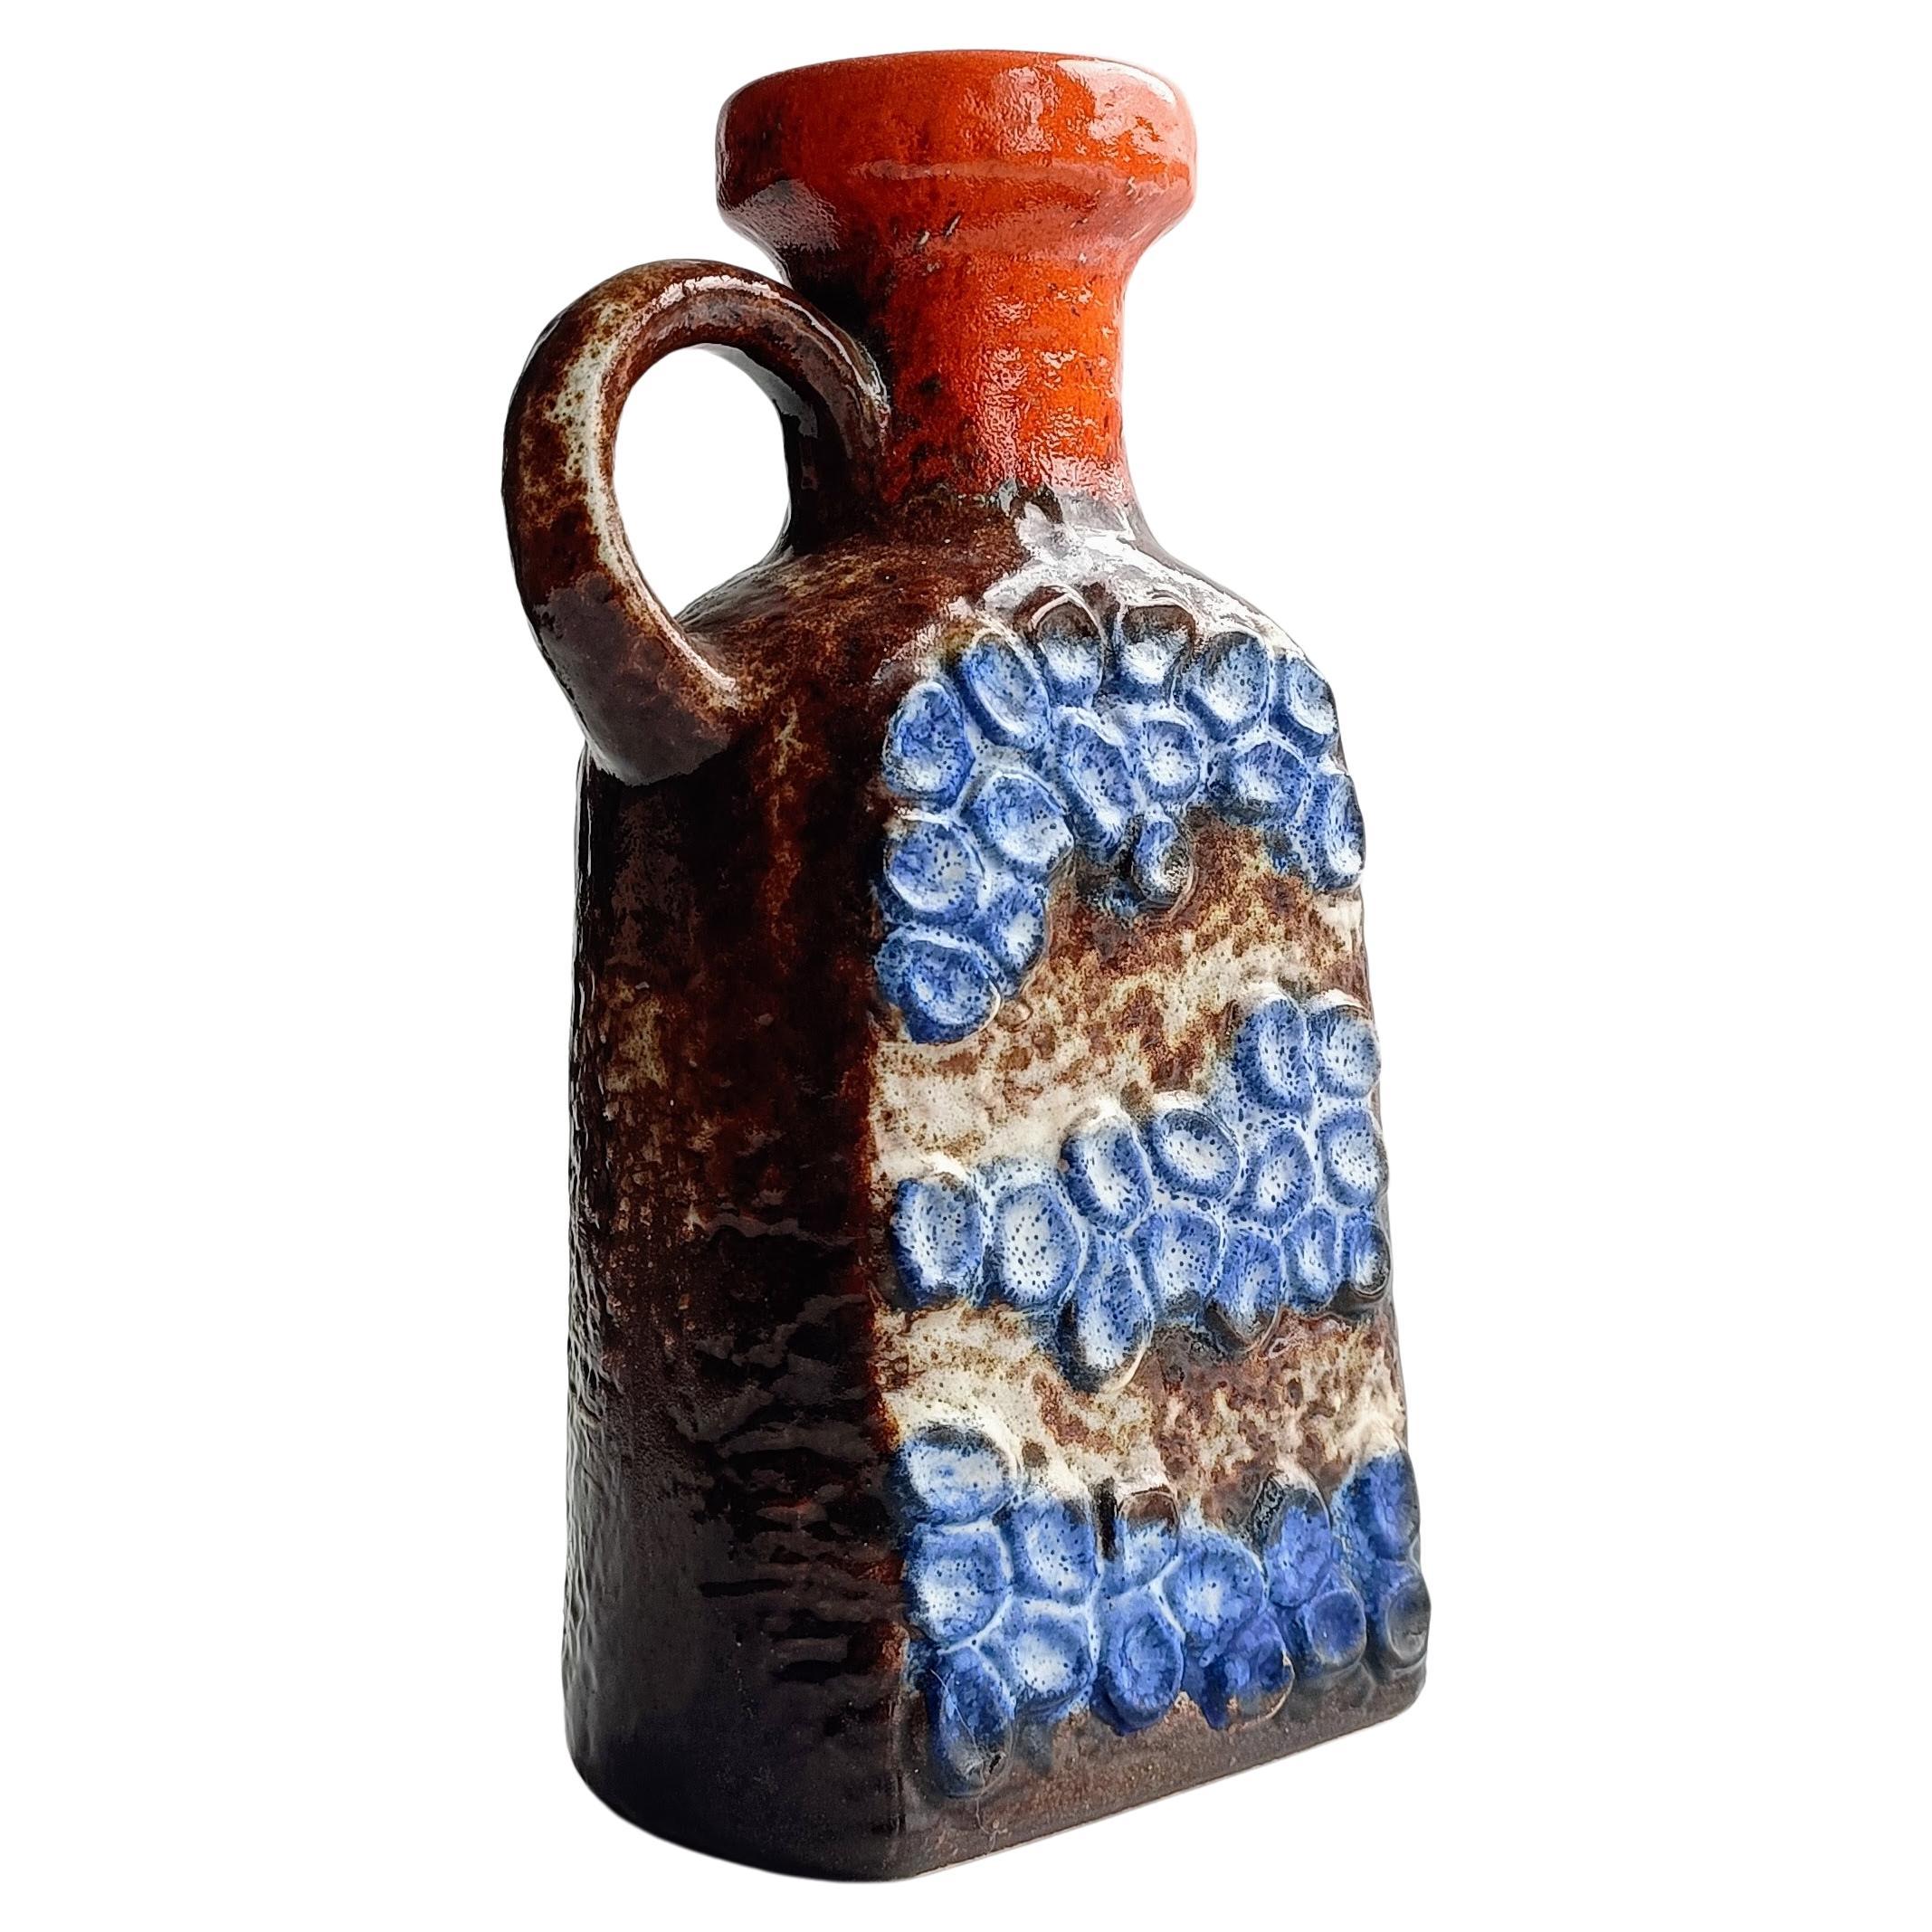 An outstandingly beautiful West Germany art pottery ceramic jug by Dümler & Breiden. It features the highly sought after Domino decor in brown, orange, and blue colors.  Hand-produced in West Germany circa the 1960s.

The Dümler & Breiden pottery